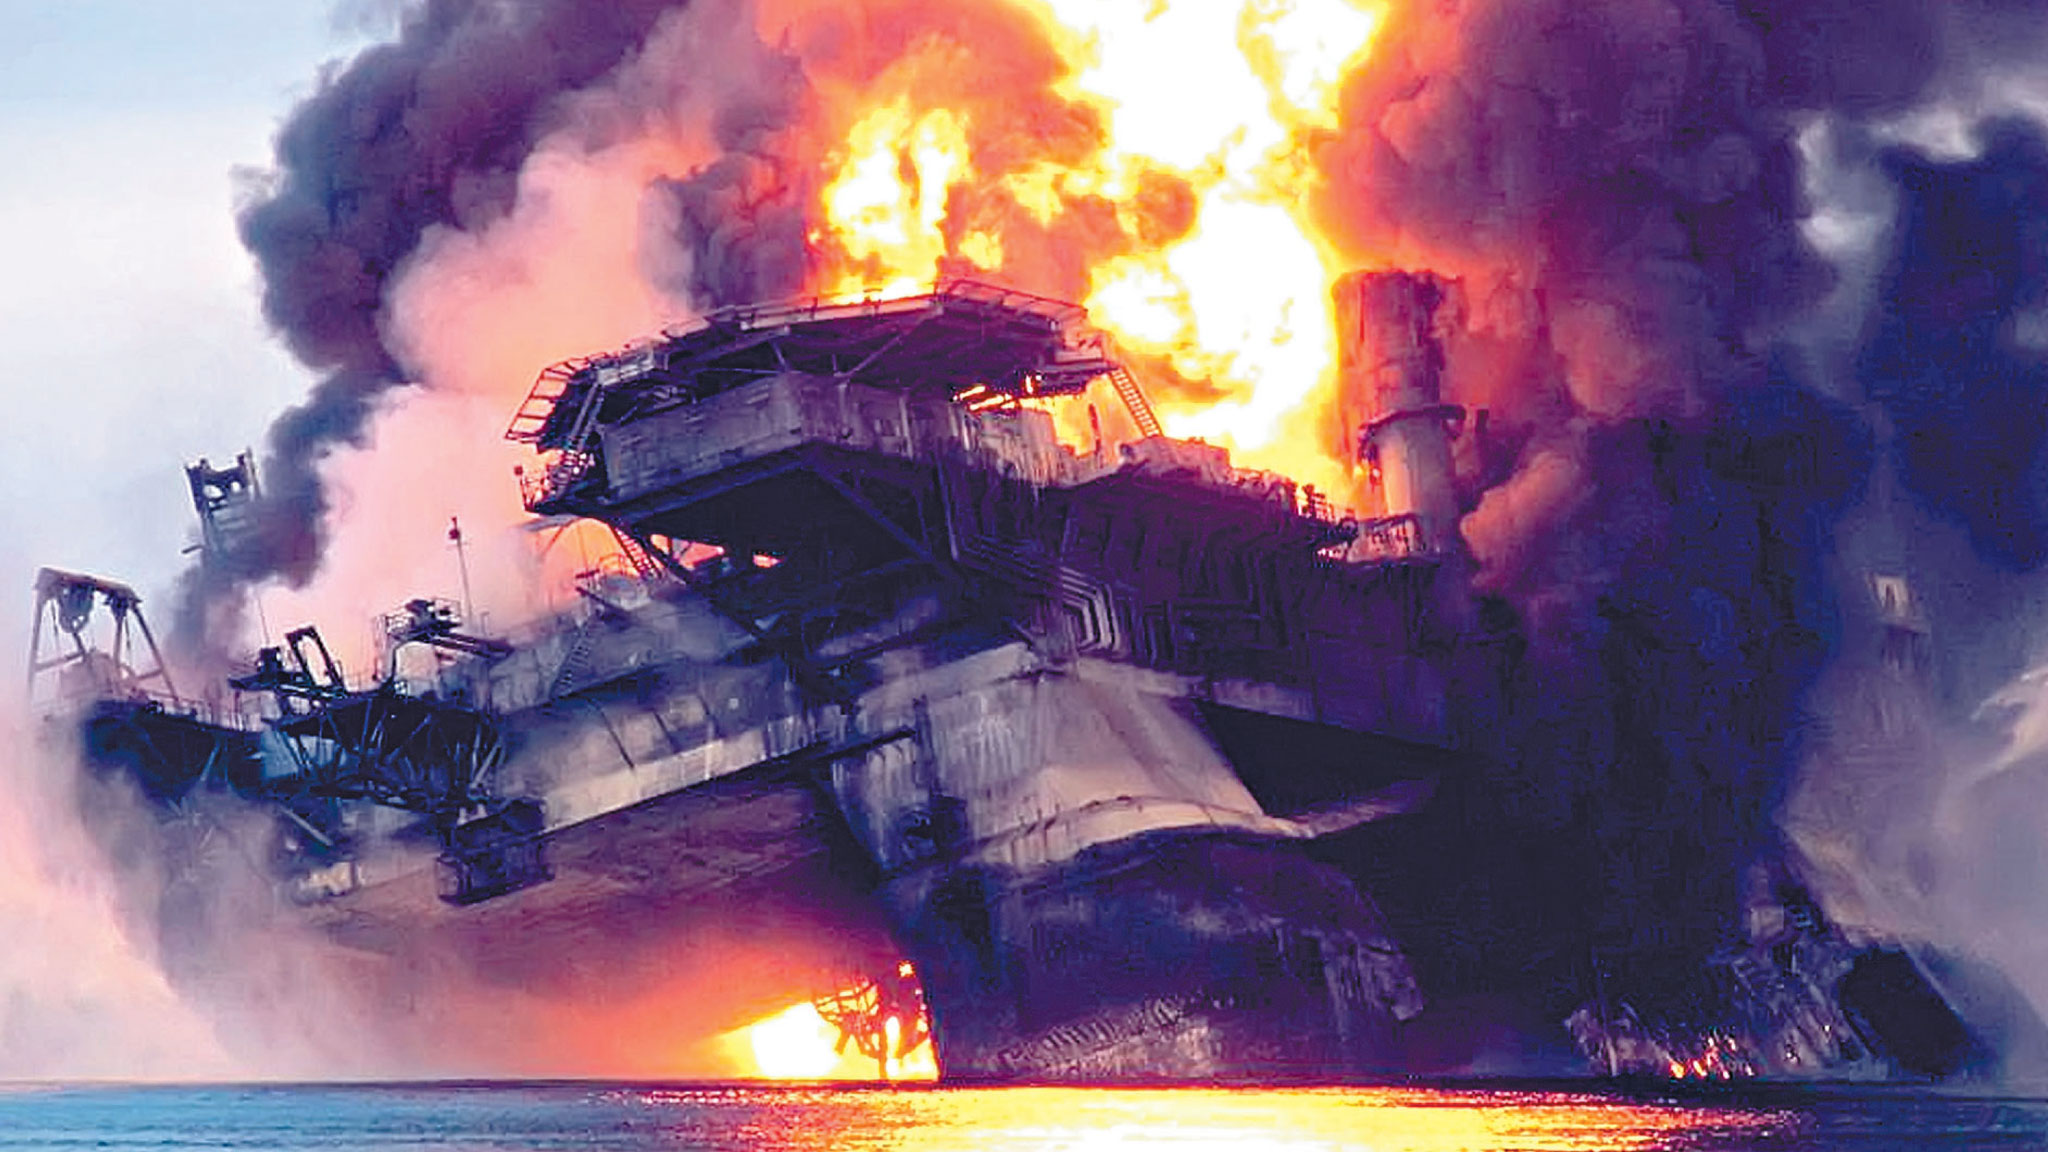 Issues at heart of Deepwater Horizon